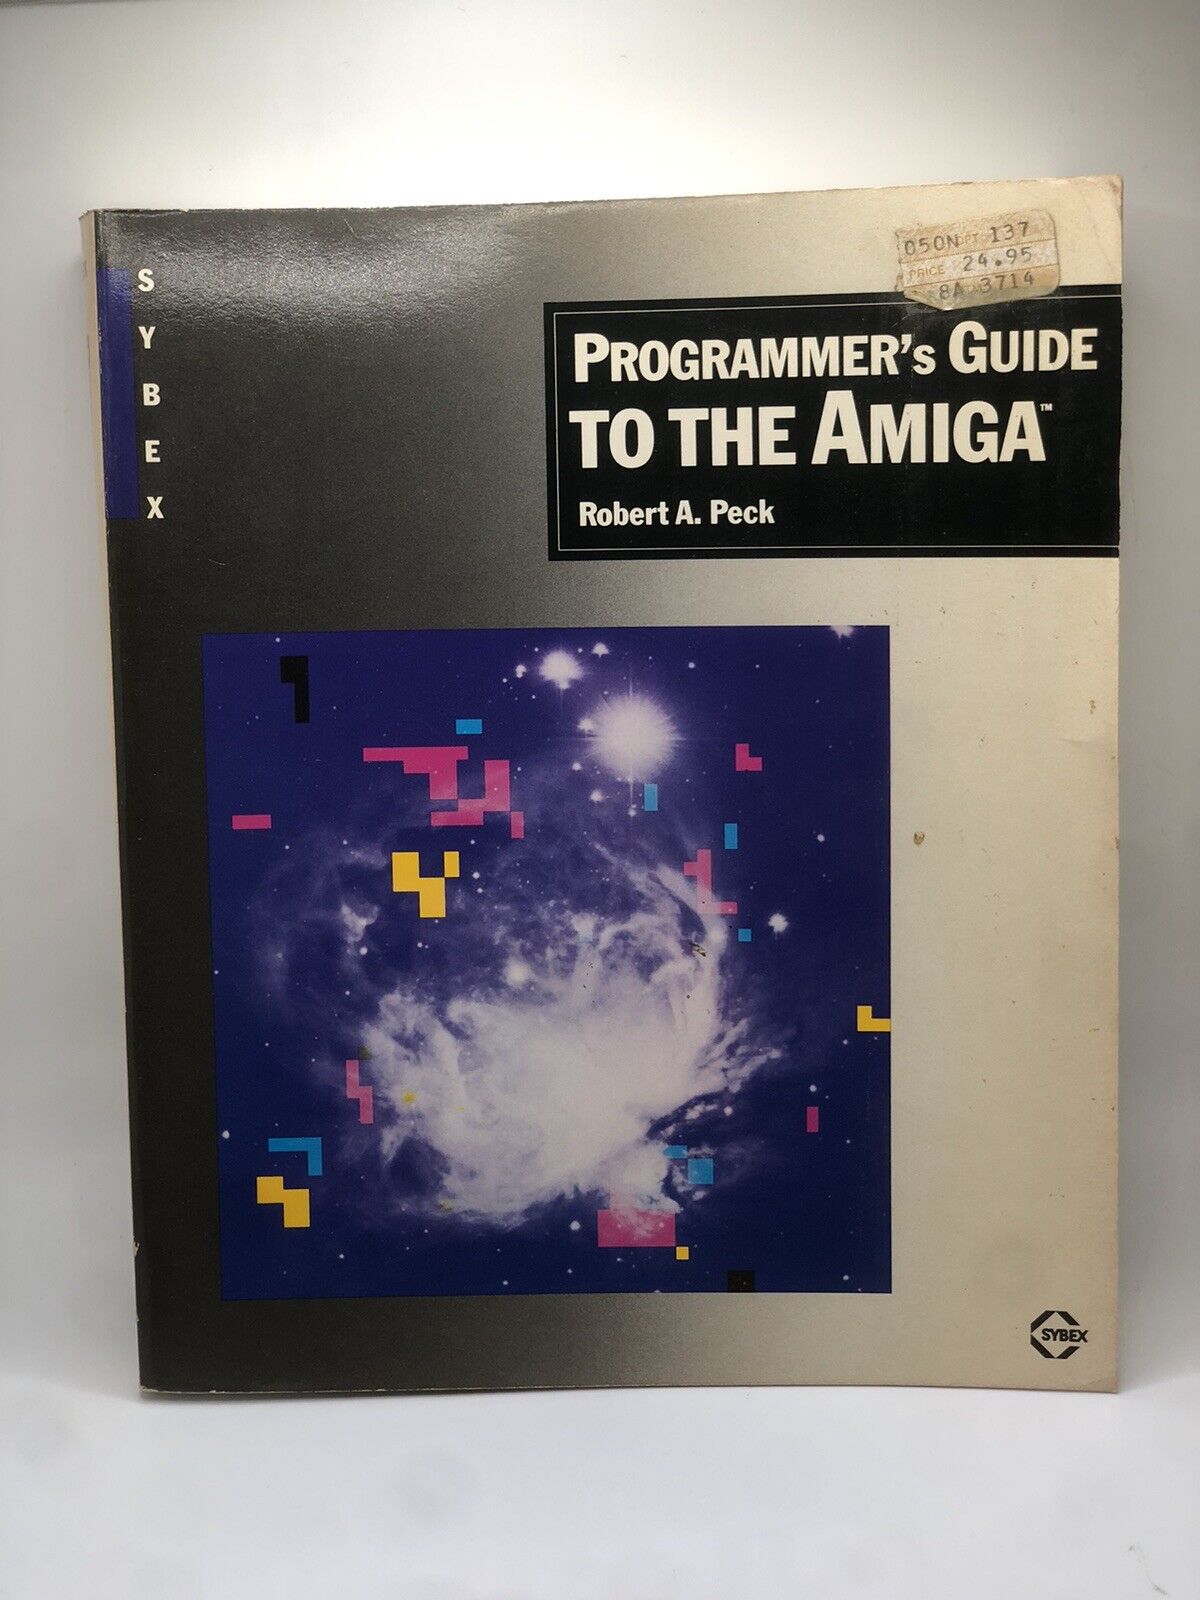 Vtg SYBEX 1987 Commodore Computer Programmer's Guide To The AMIGA Robert A Peck